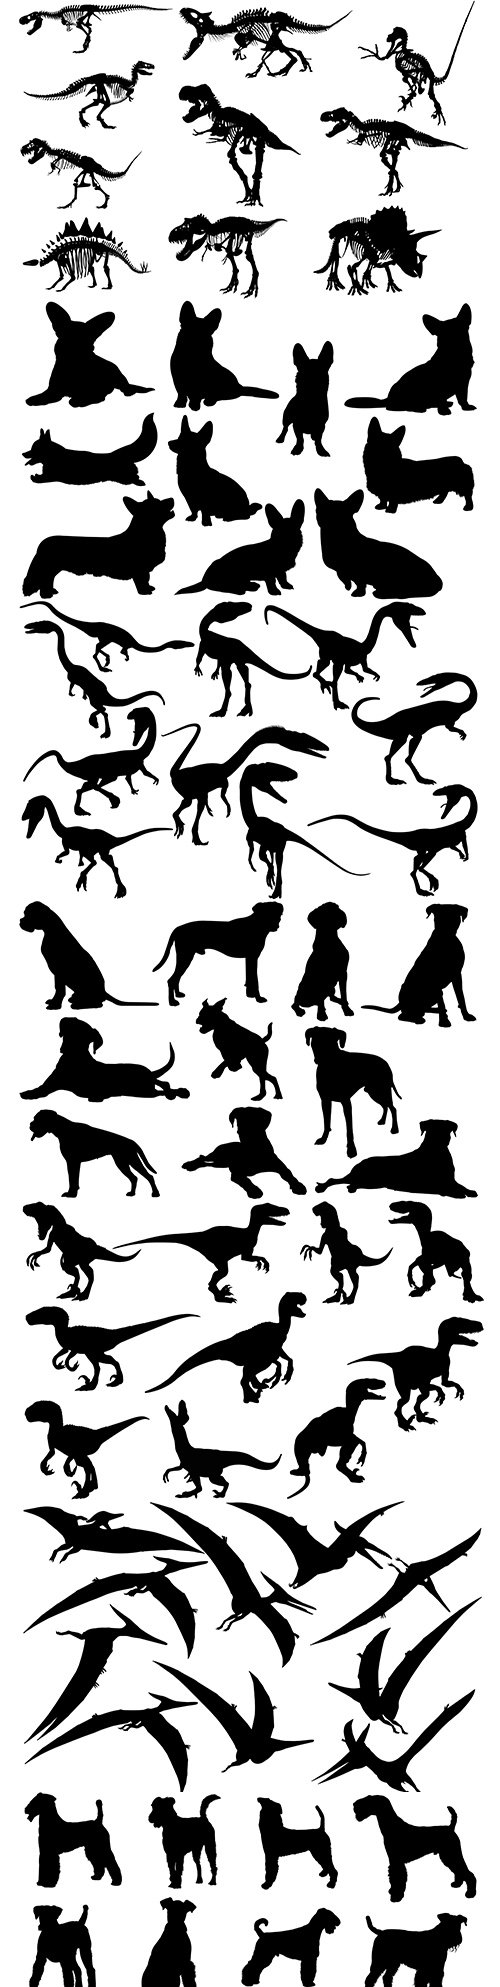 Dinosaur and dogs collection black silhouettes